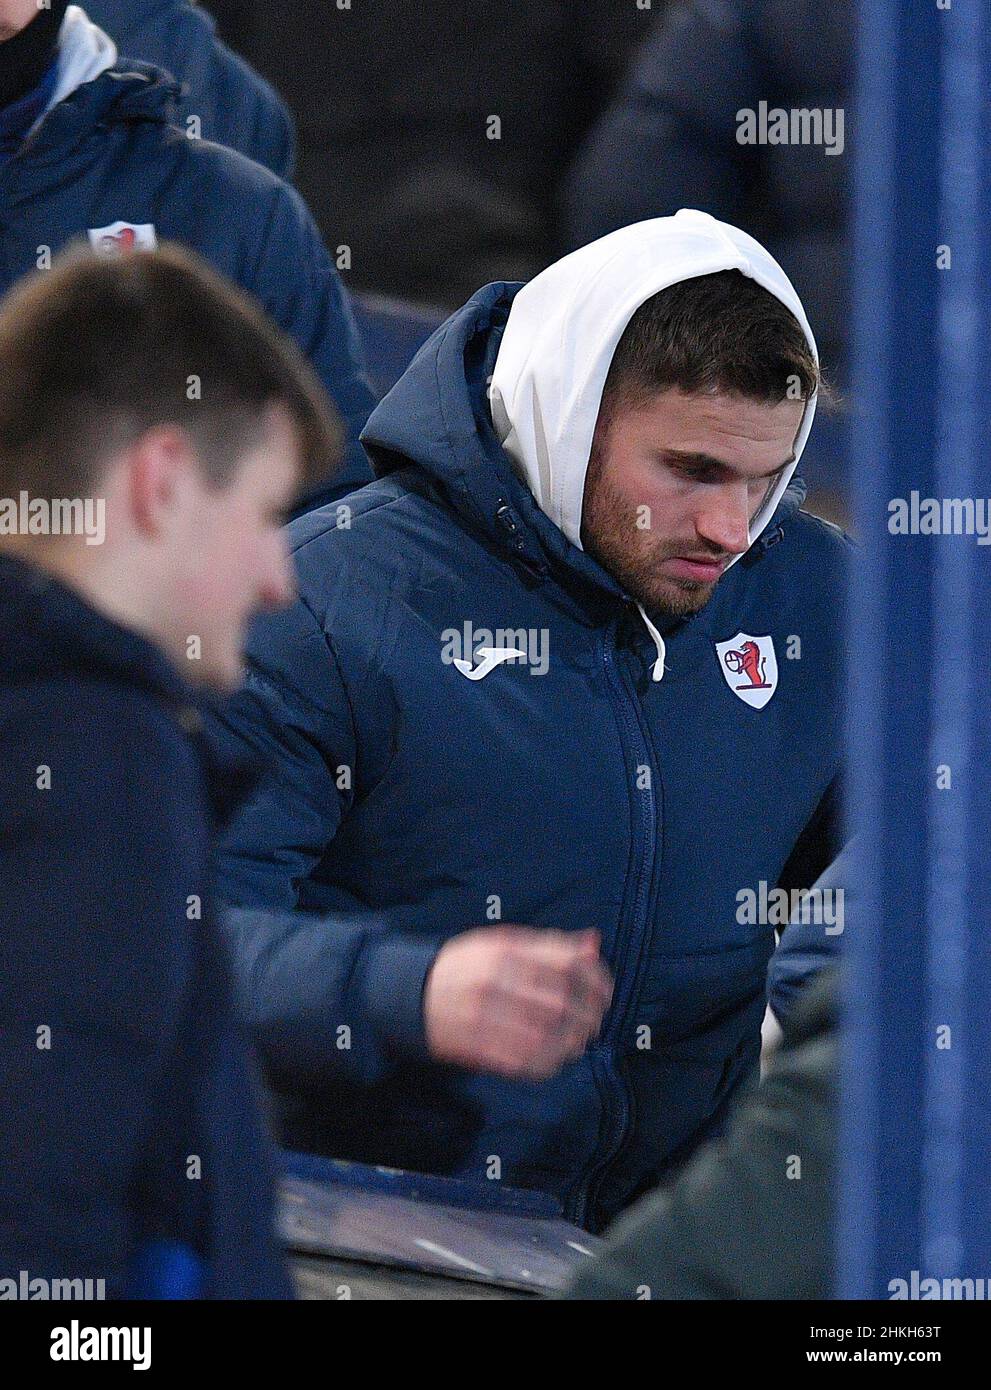 David Goodwillie, who was judged in a civil case to have raped a woman and ordered to pay substantial damages, sits in the stand to watch his new team Raith Rovers play Queen of the South on Tuesday 05 February 2022. The decision to sign Goodwillie caused widespread outrage, and led to the Kirkcaldy club cancelling his signing two days later.  (c) Dave Johnston Stock Photo